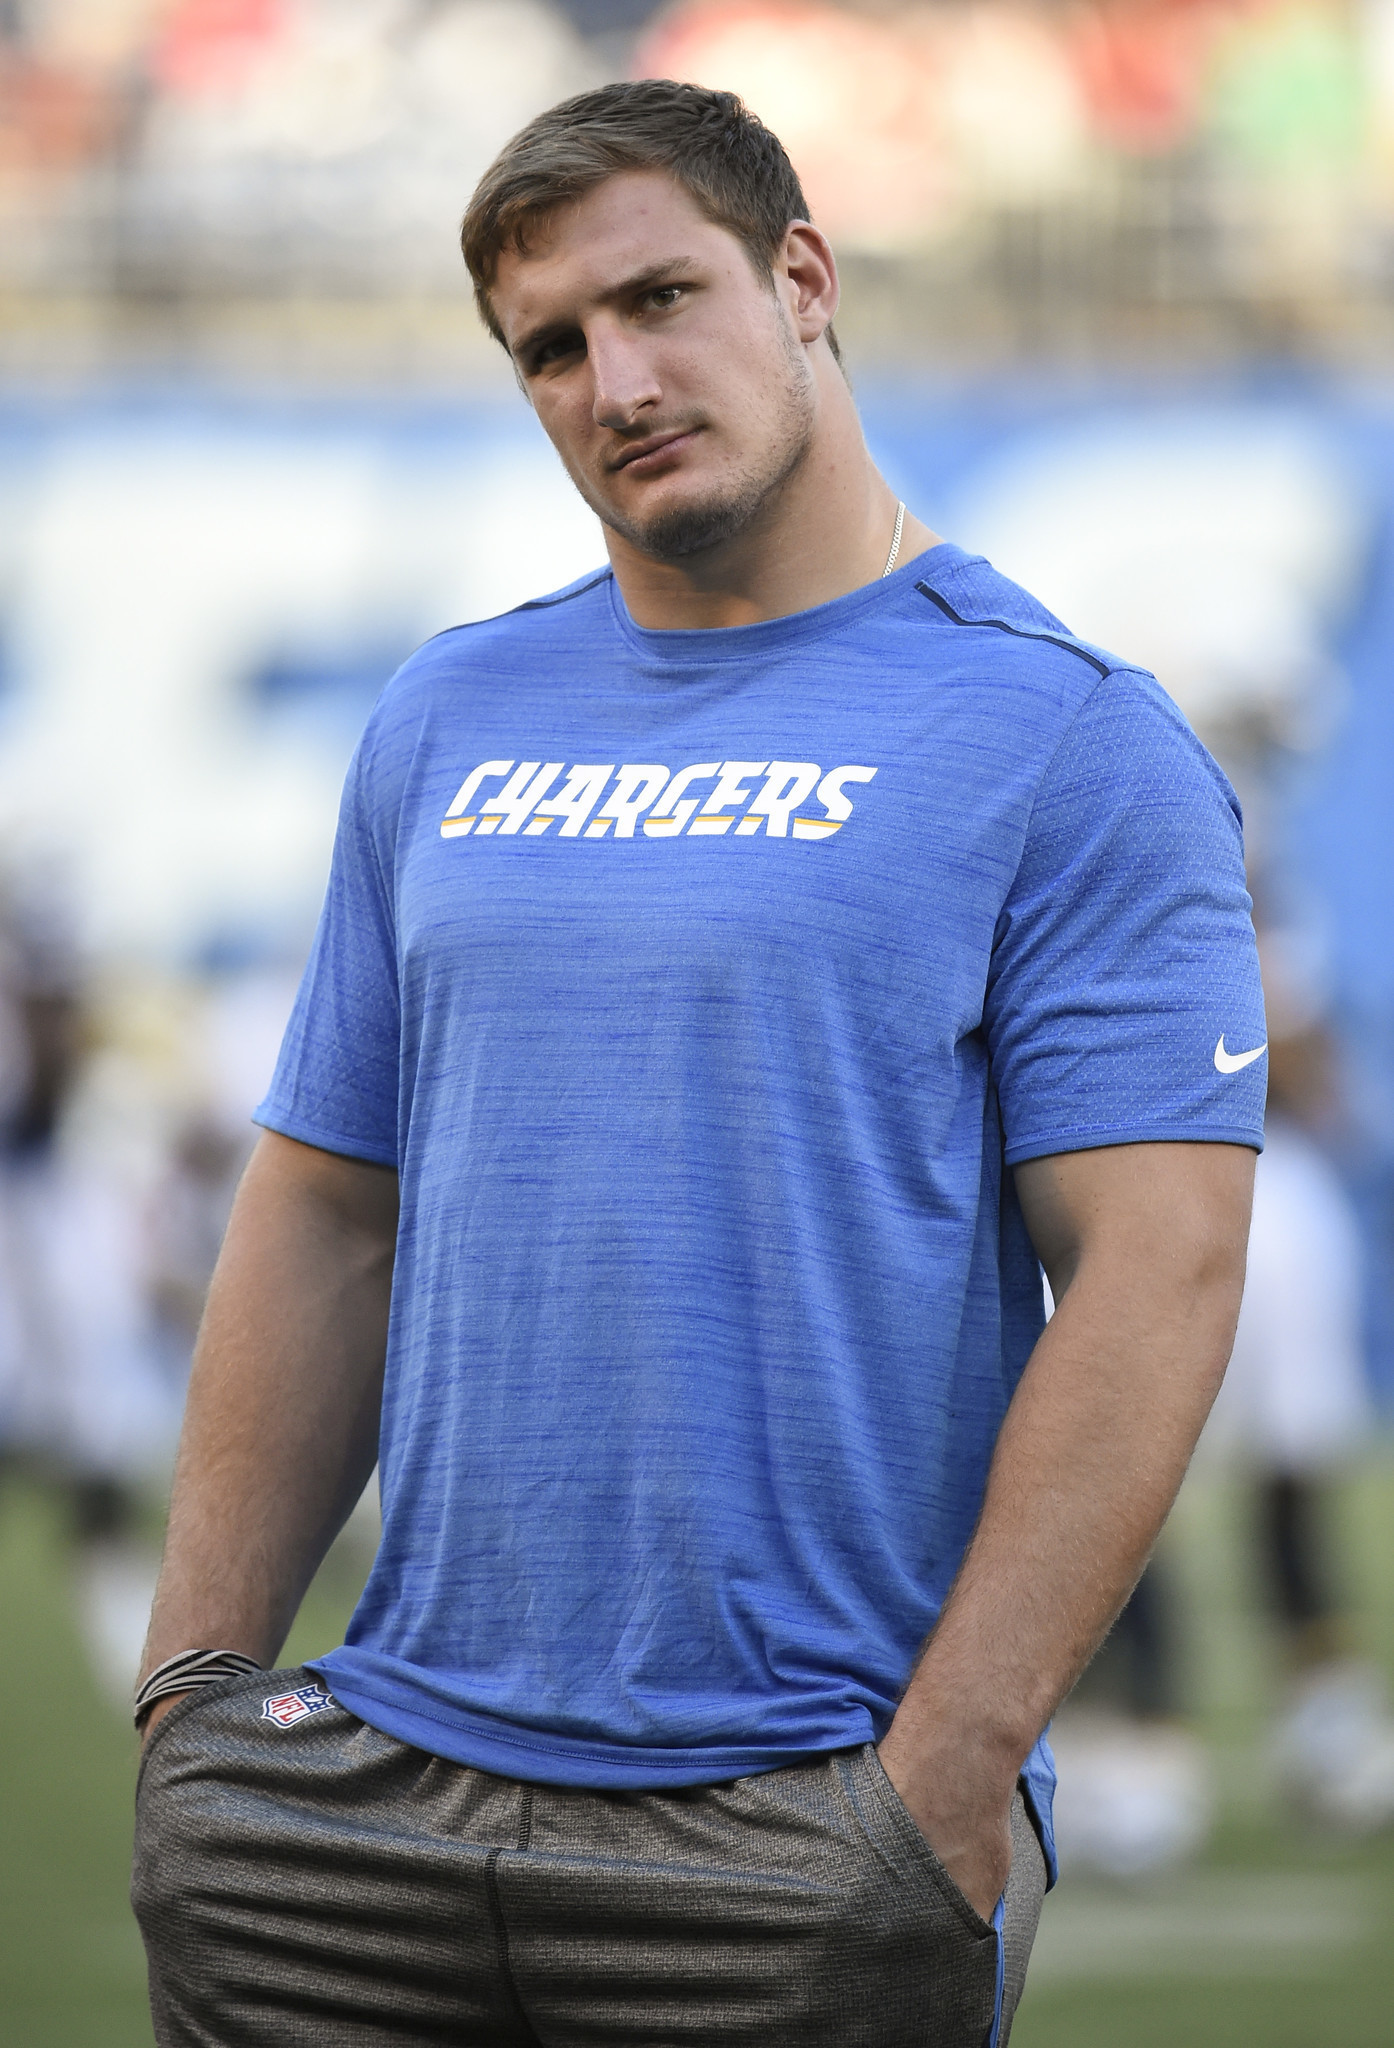 Joey Bosa unlikely to debut Sunday vs. Jags - The San Diego Union-Tribune1394 x 2048